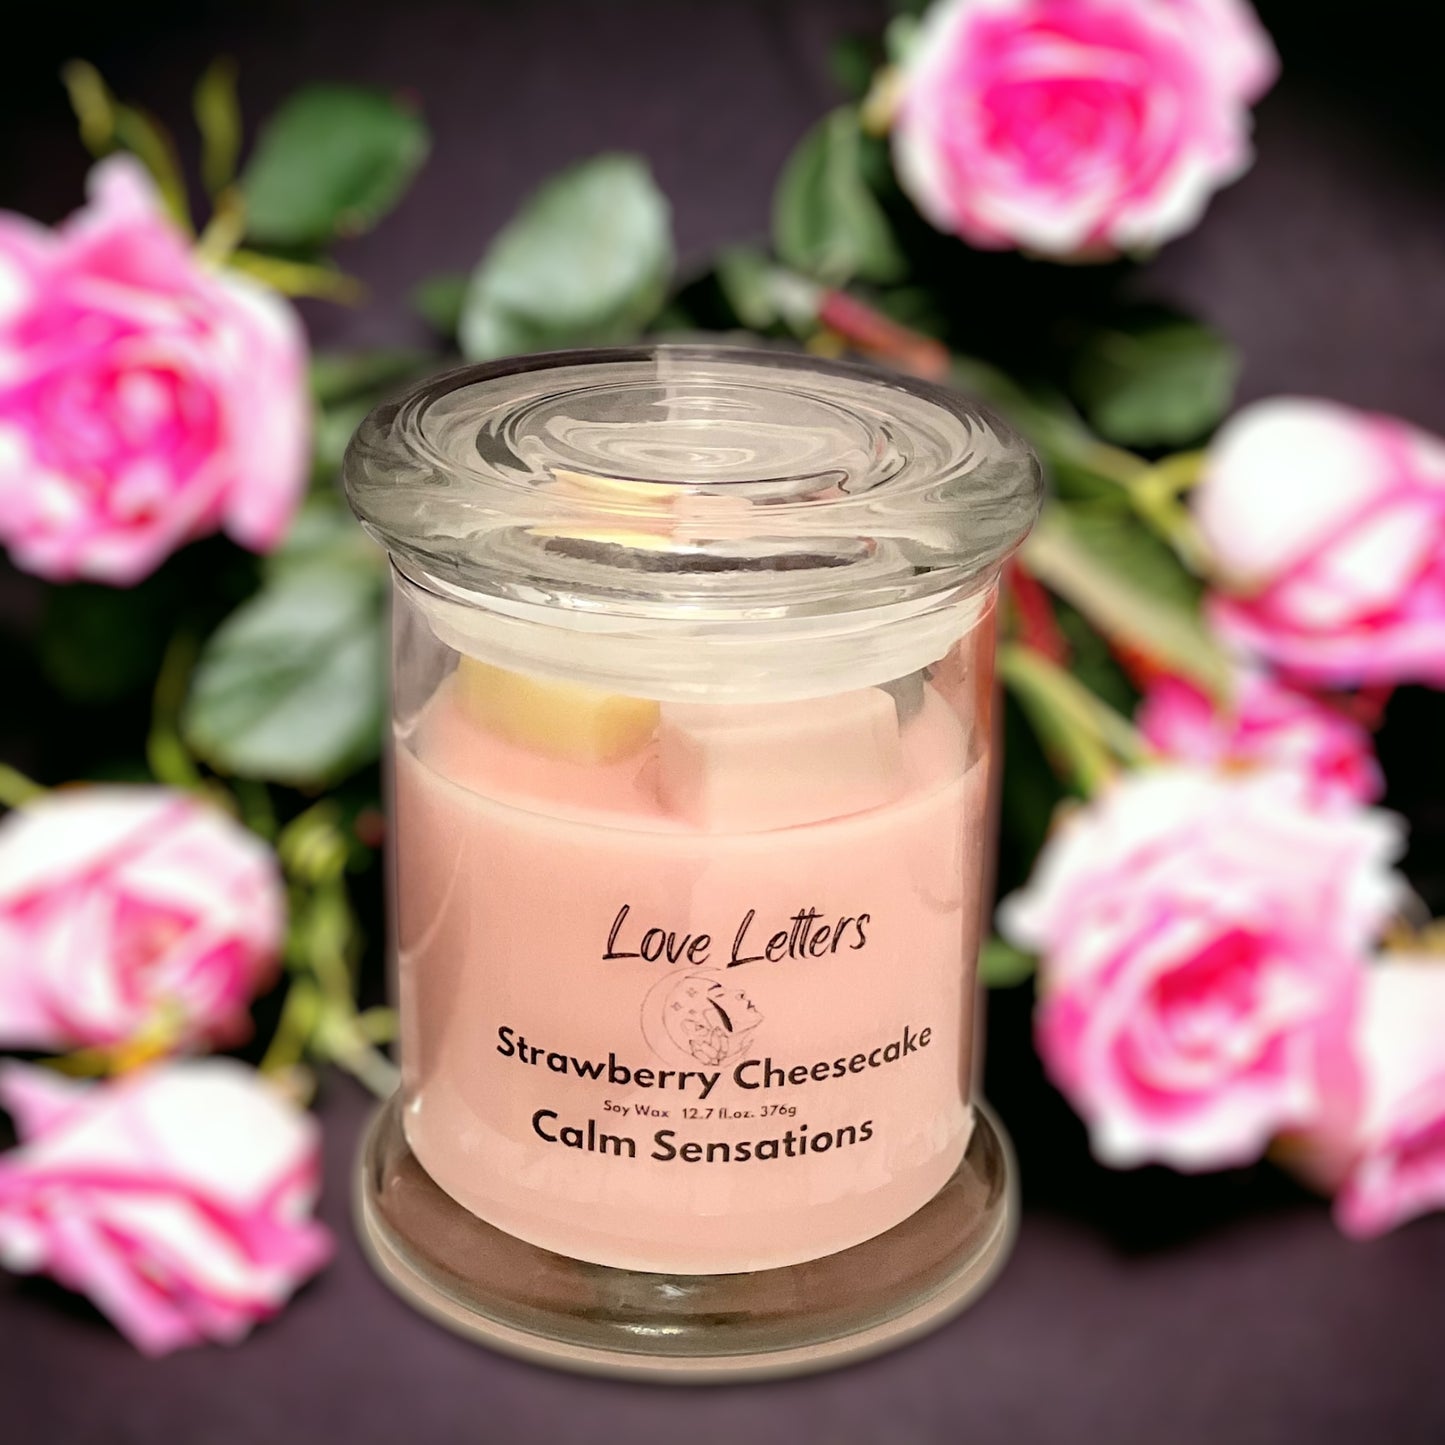 LOVE LETTERS (Strawberry Cheesecake)